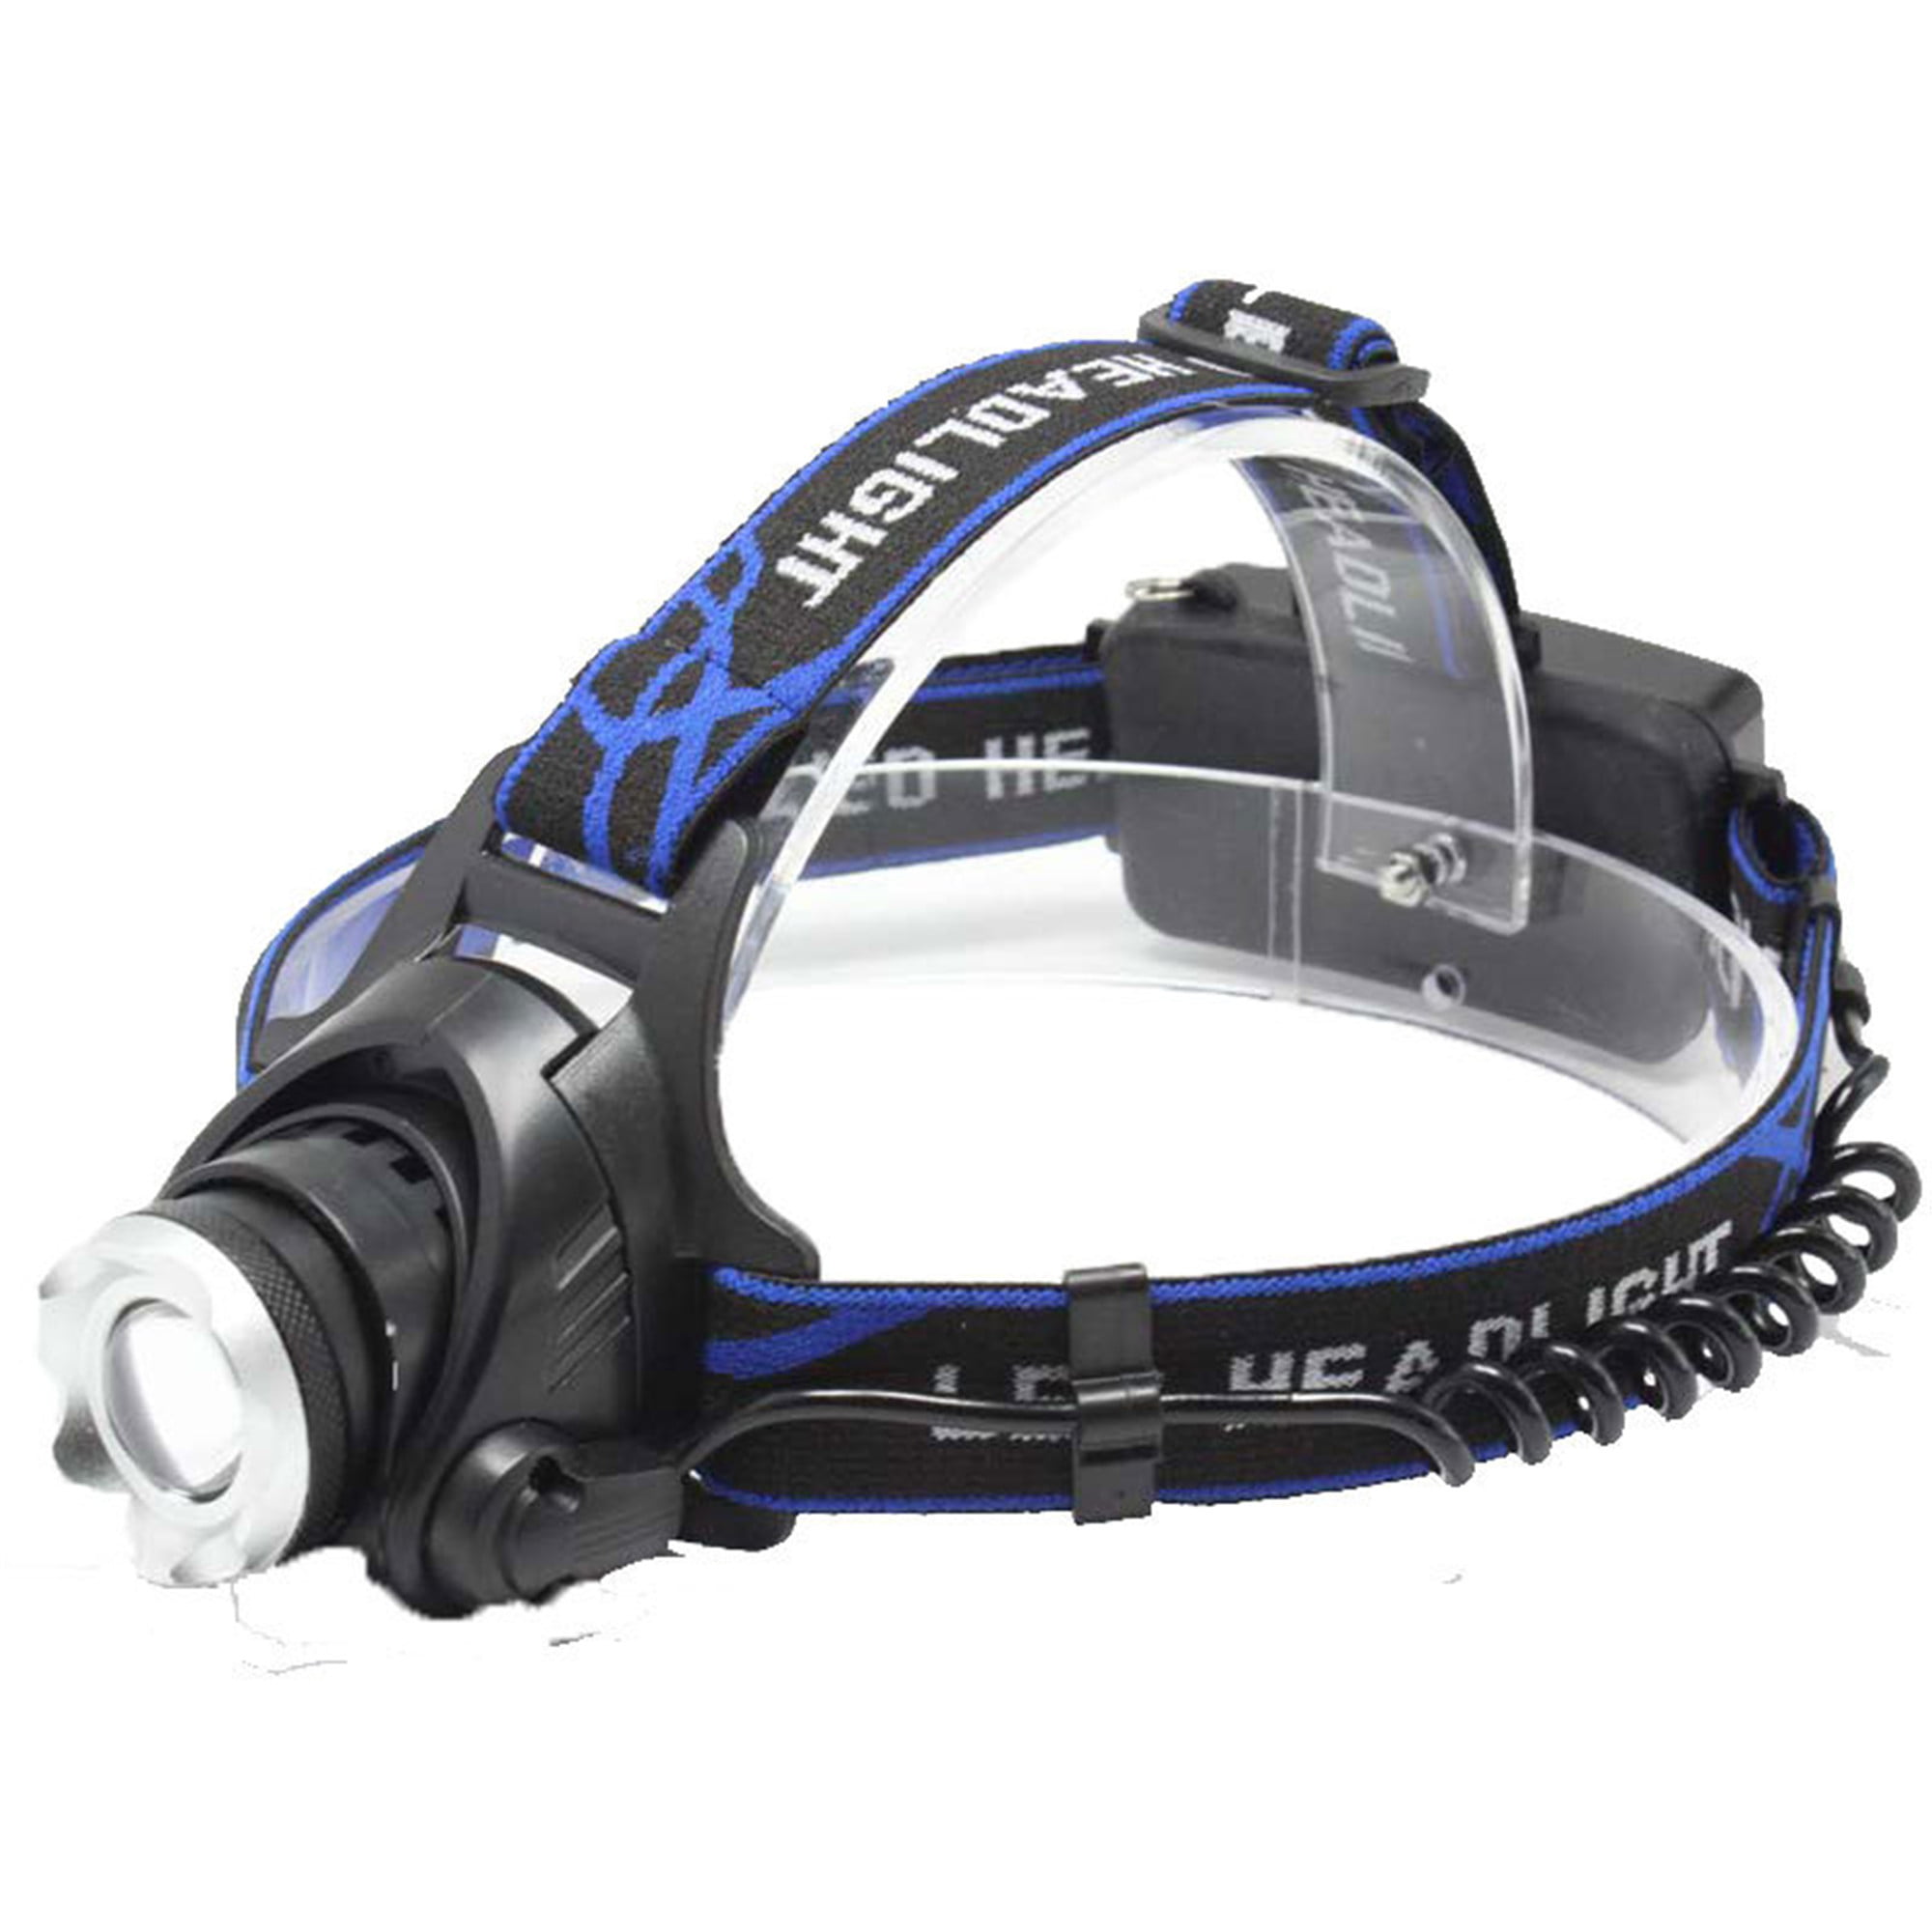 Zoom Headlamp 350000LM Rechargeable T6 LED Headlight Flashlight Head Torch FishY 